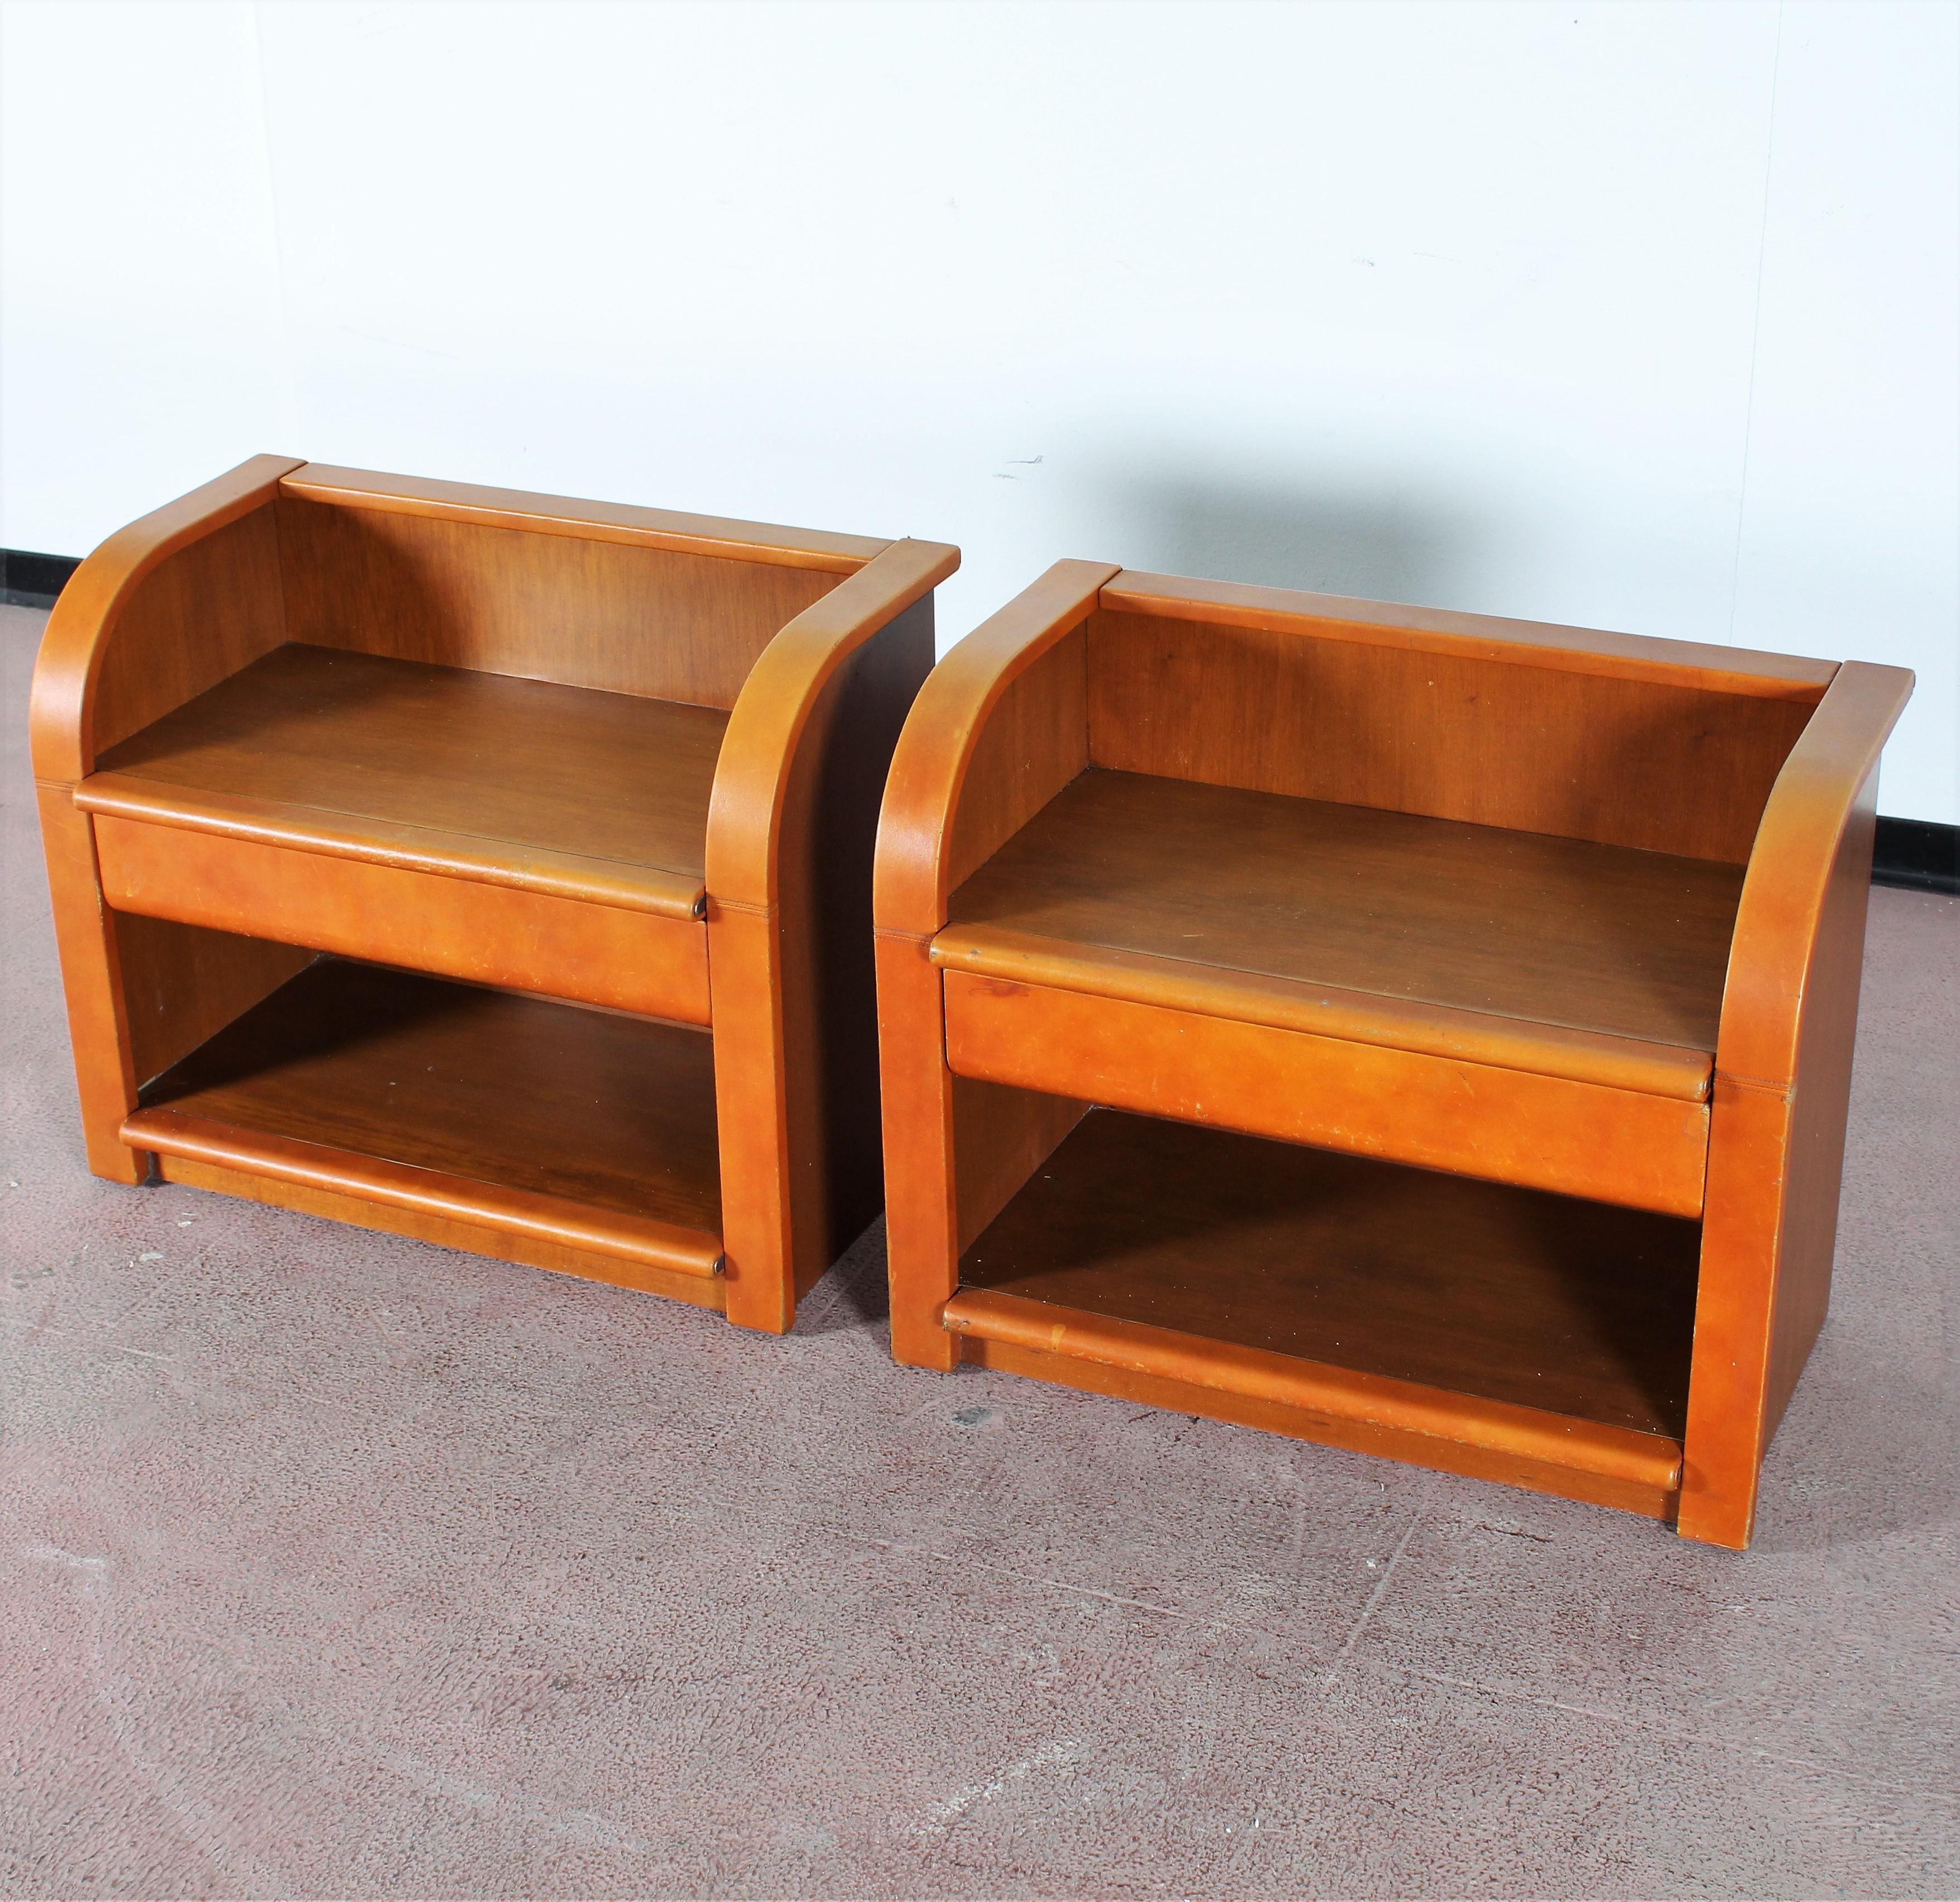 Mid-Century Modern Midcentury Wood and Leather Poltrona Frau Nightstands, Set of 2, Italy, 1960s